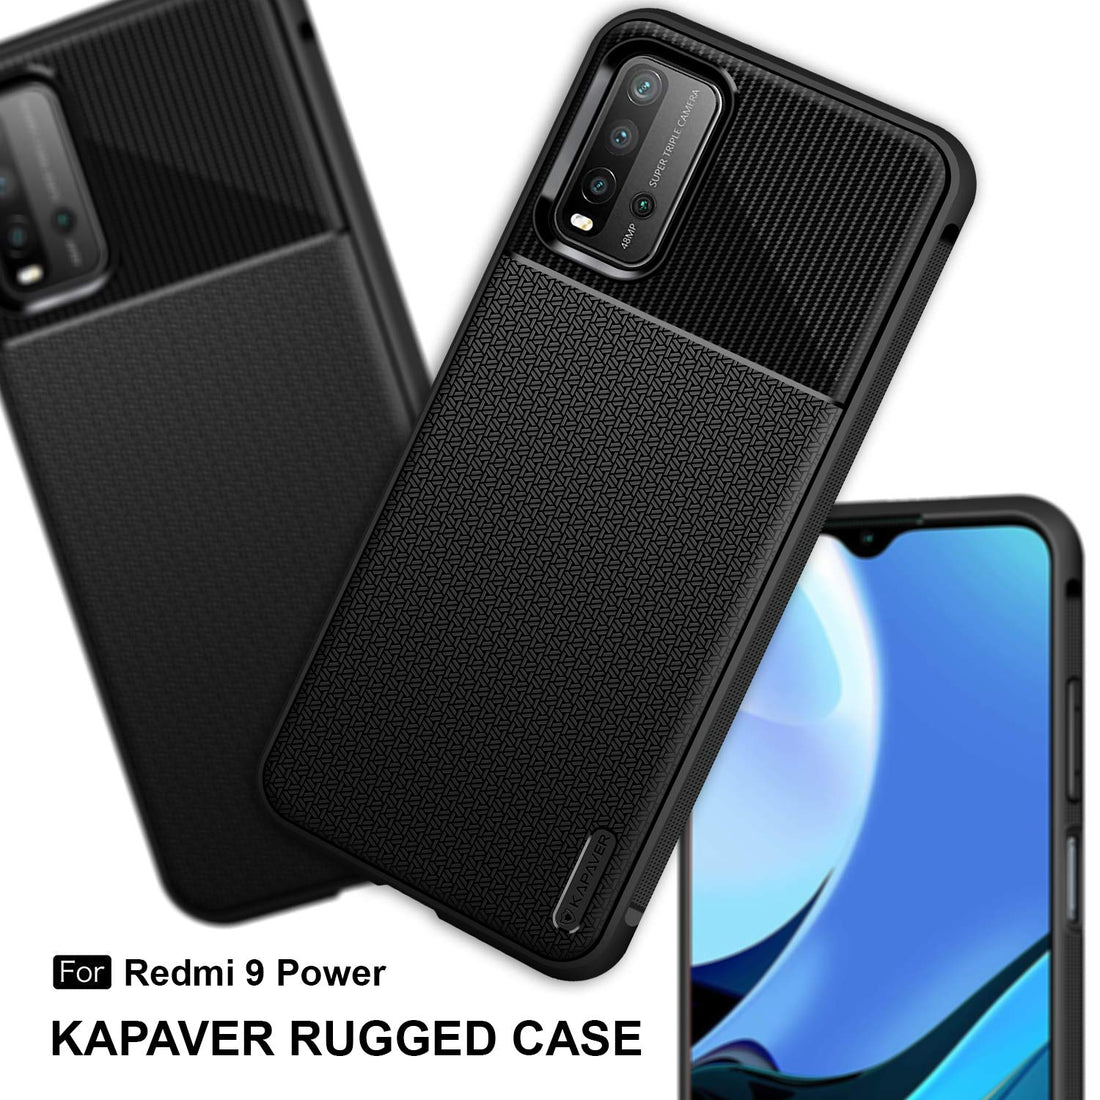 Redmi 9 Power Back Cover Case | Rugged - Black